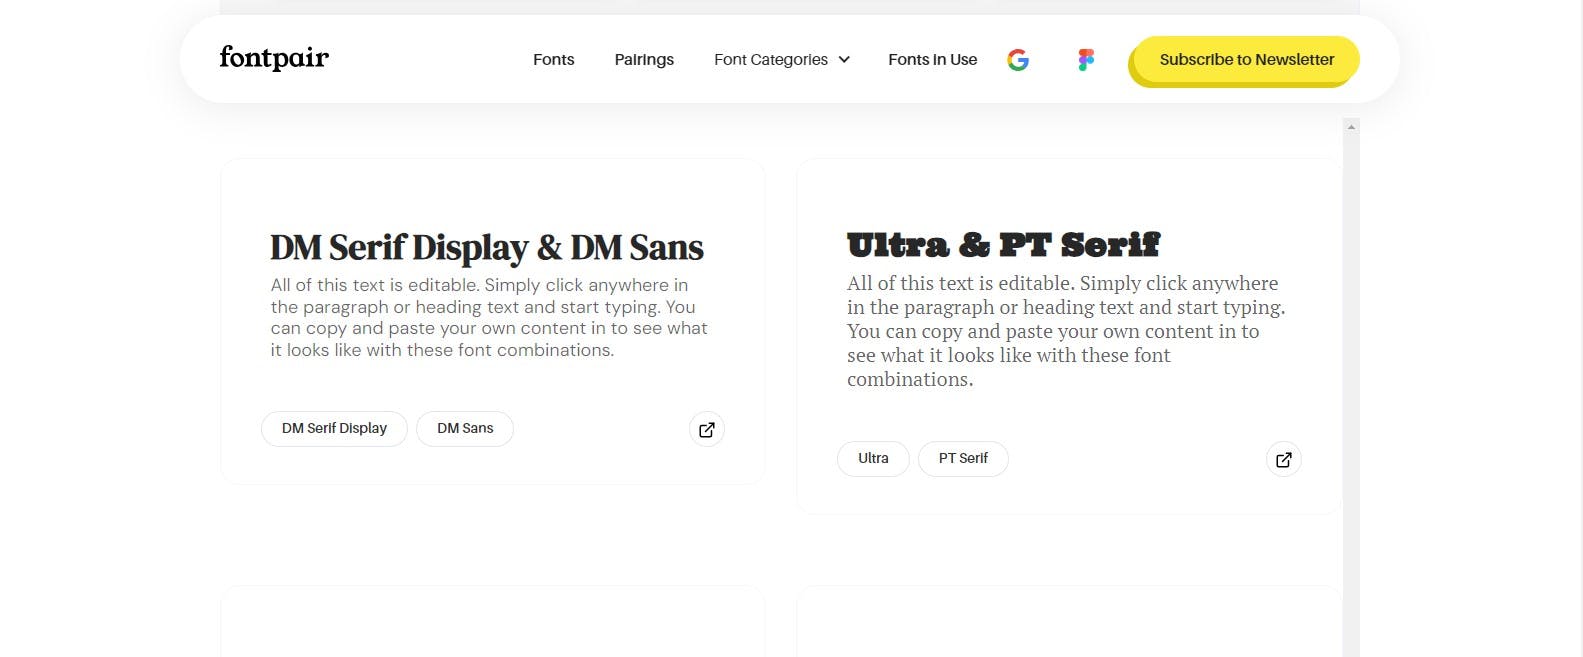 Extensive collection of Google Font pairings